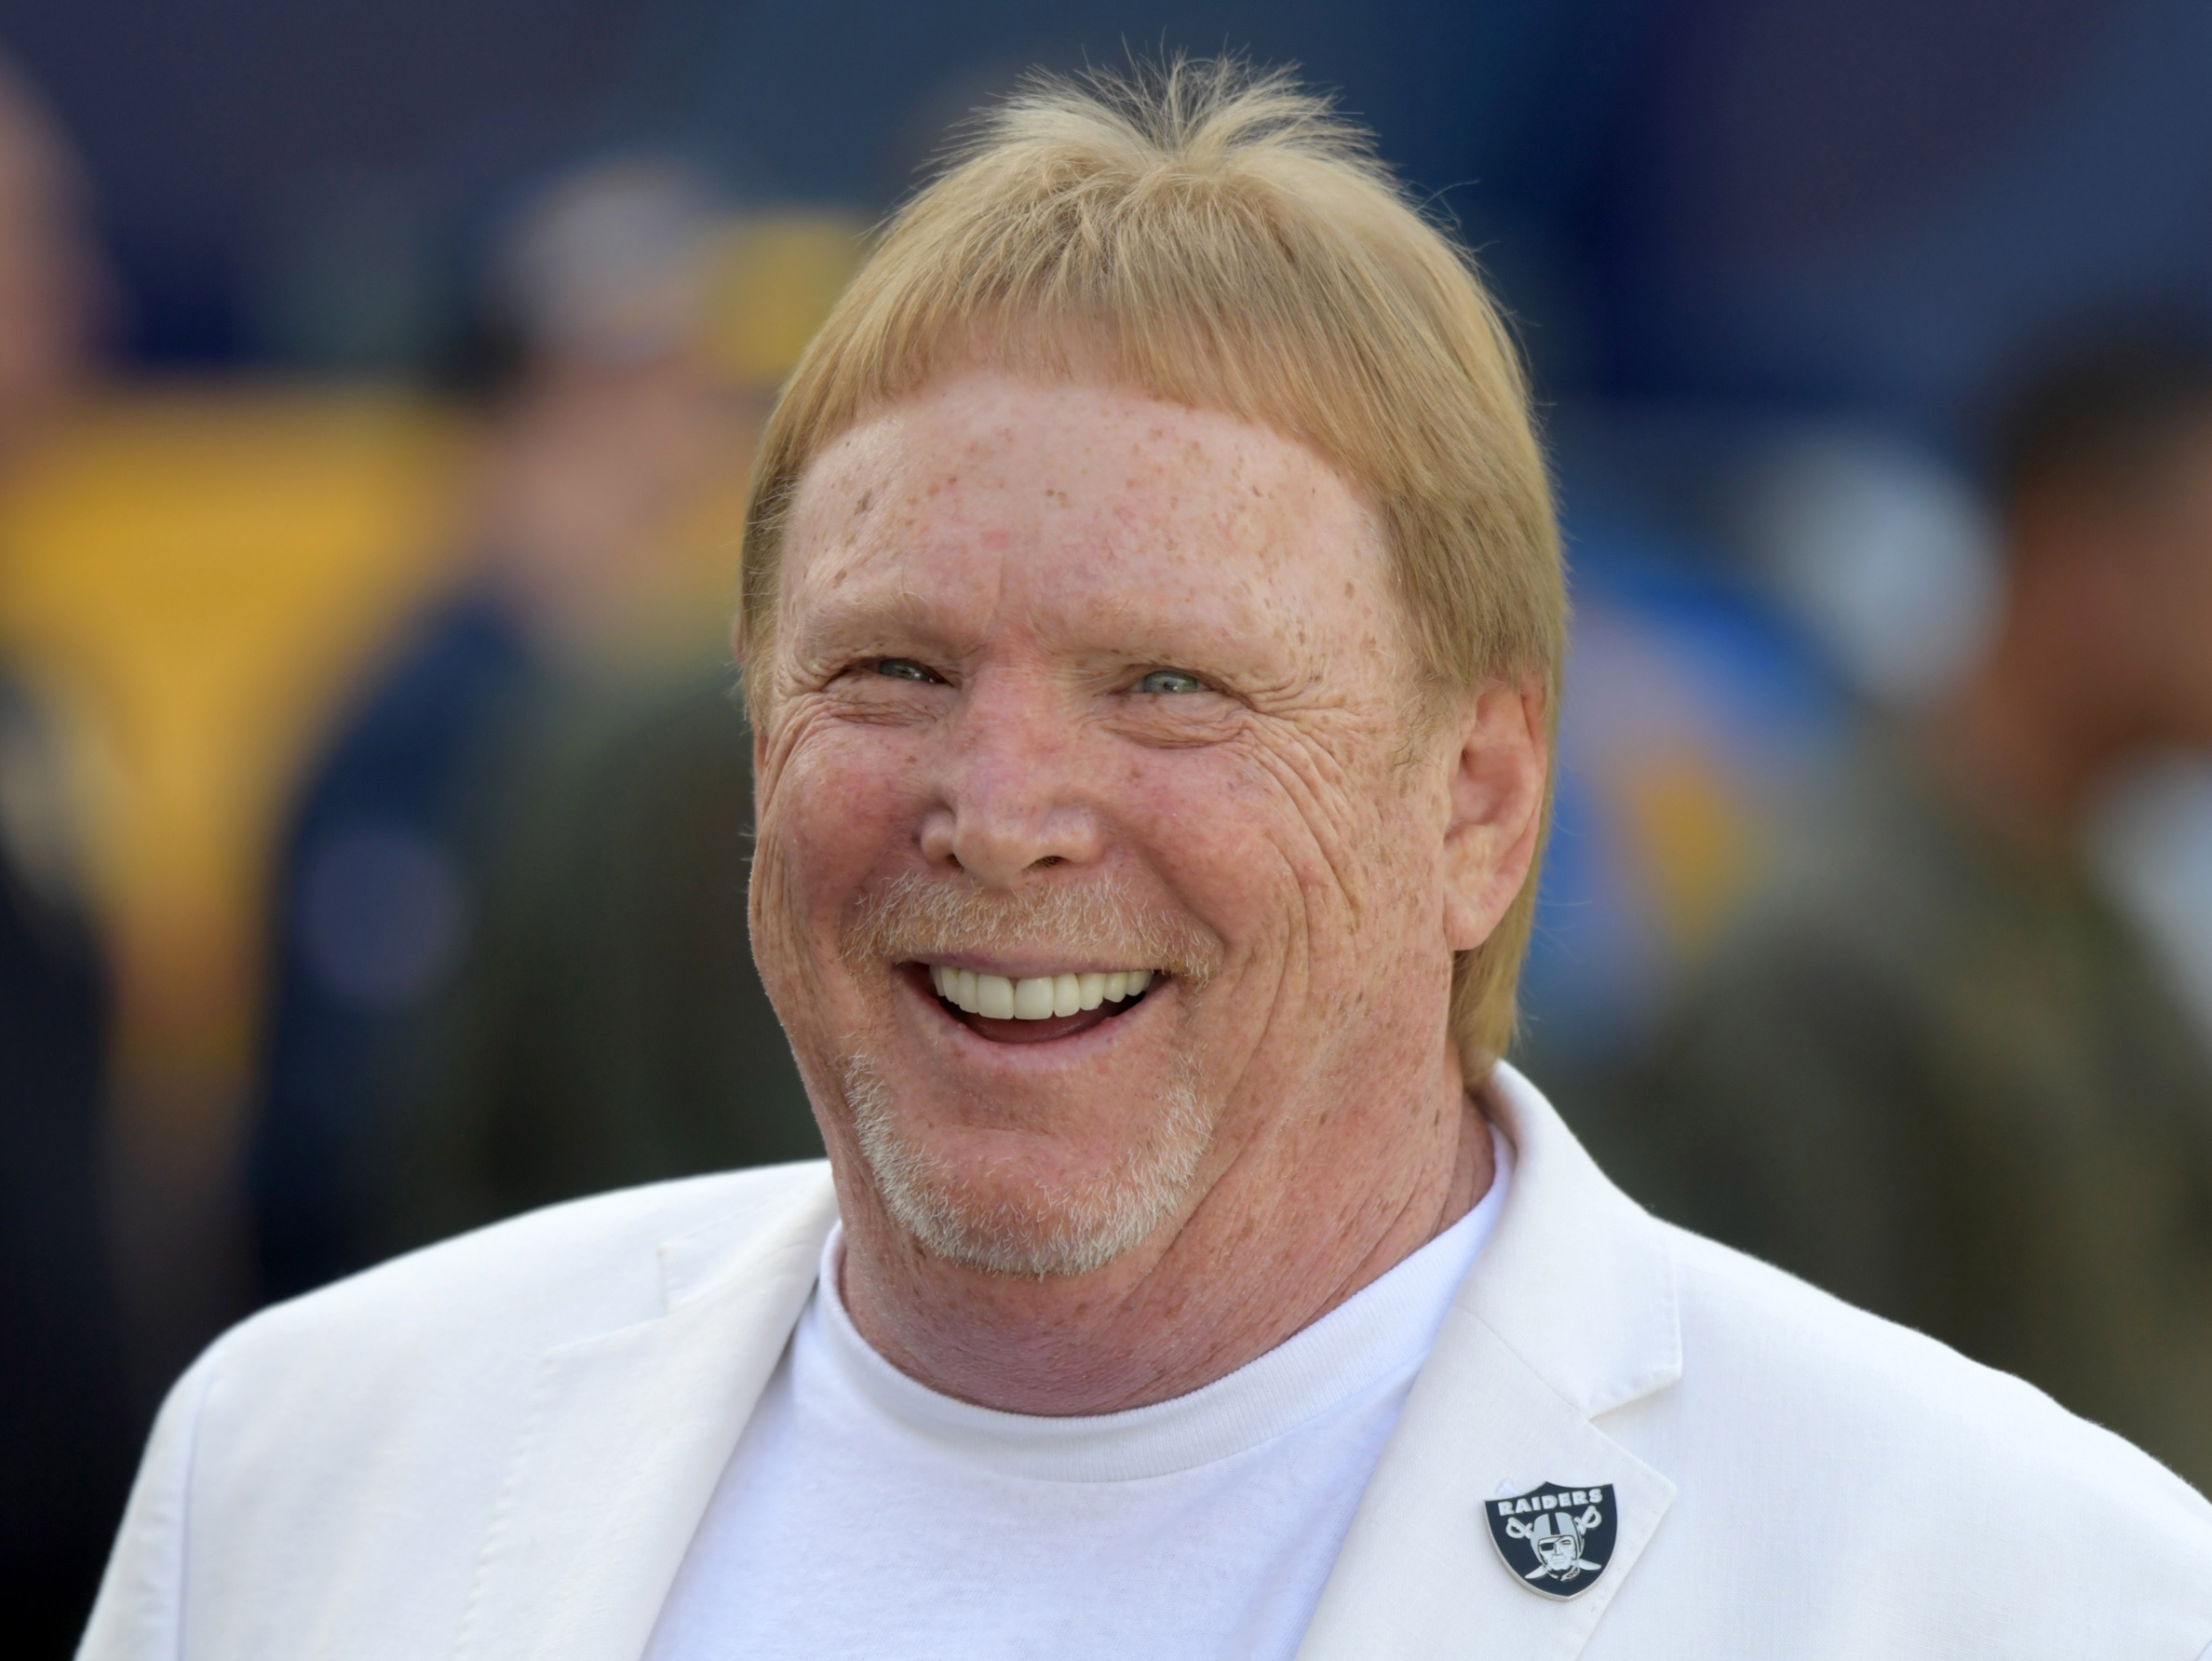 Raiders owner Mark Davis calls out A's, city of Oakland